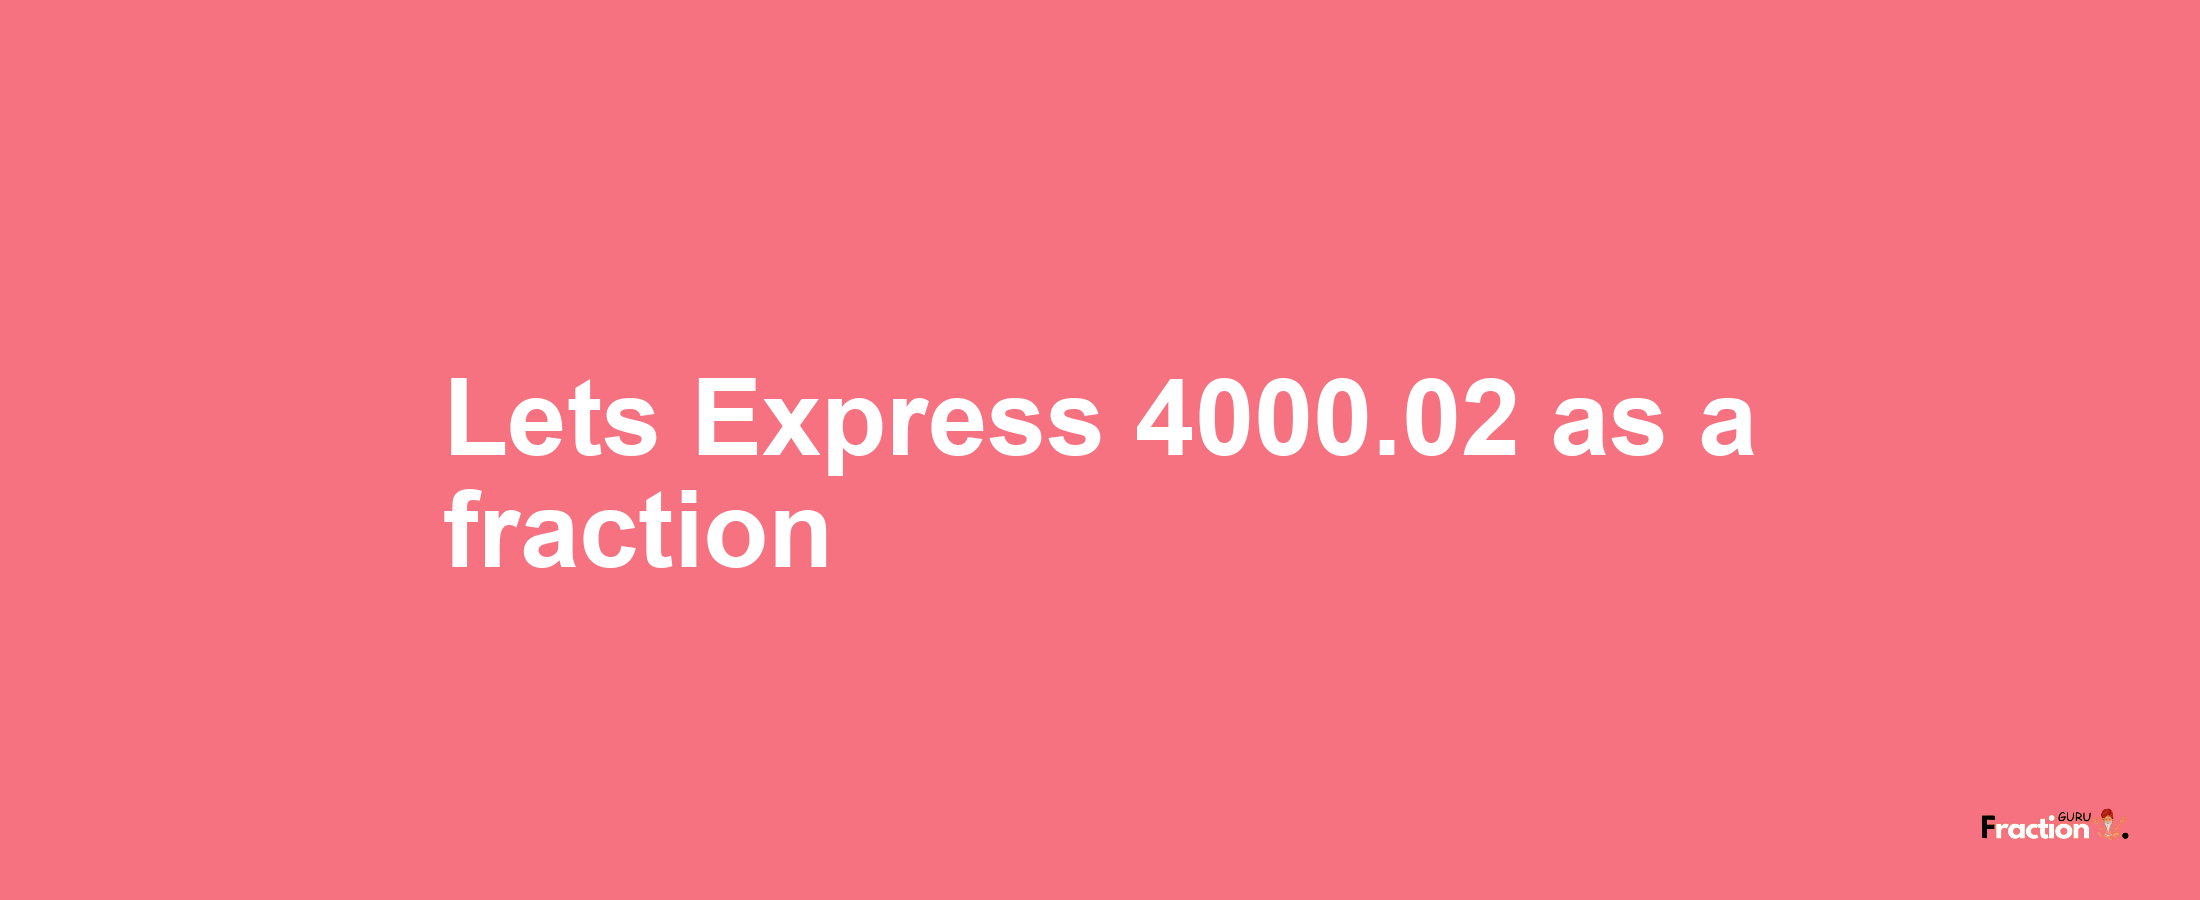 Lets Express 4000.02 as afraction